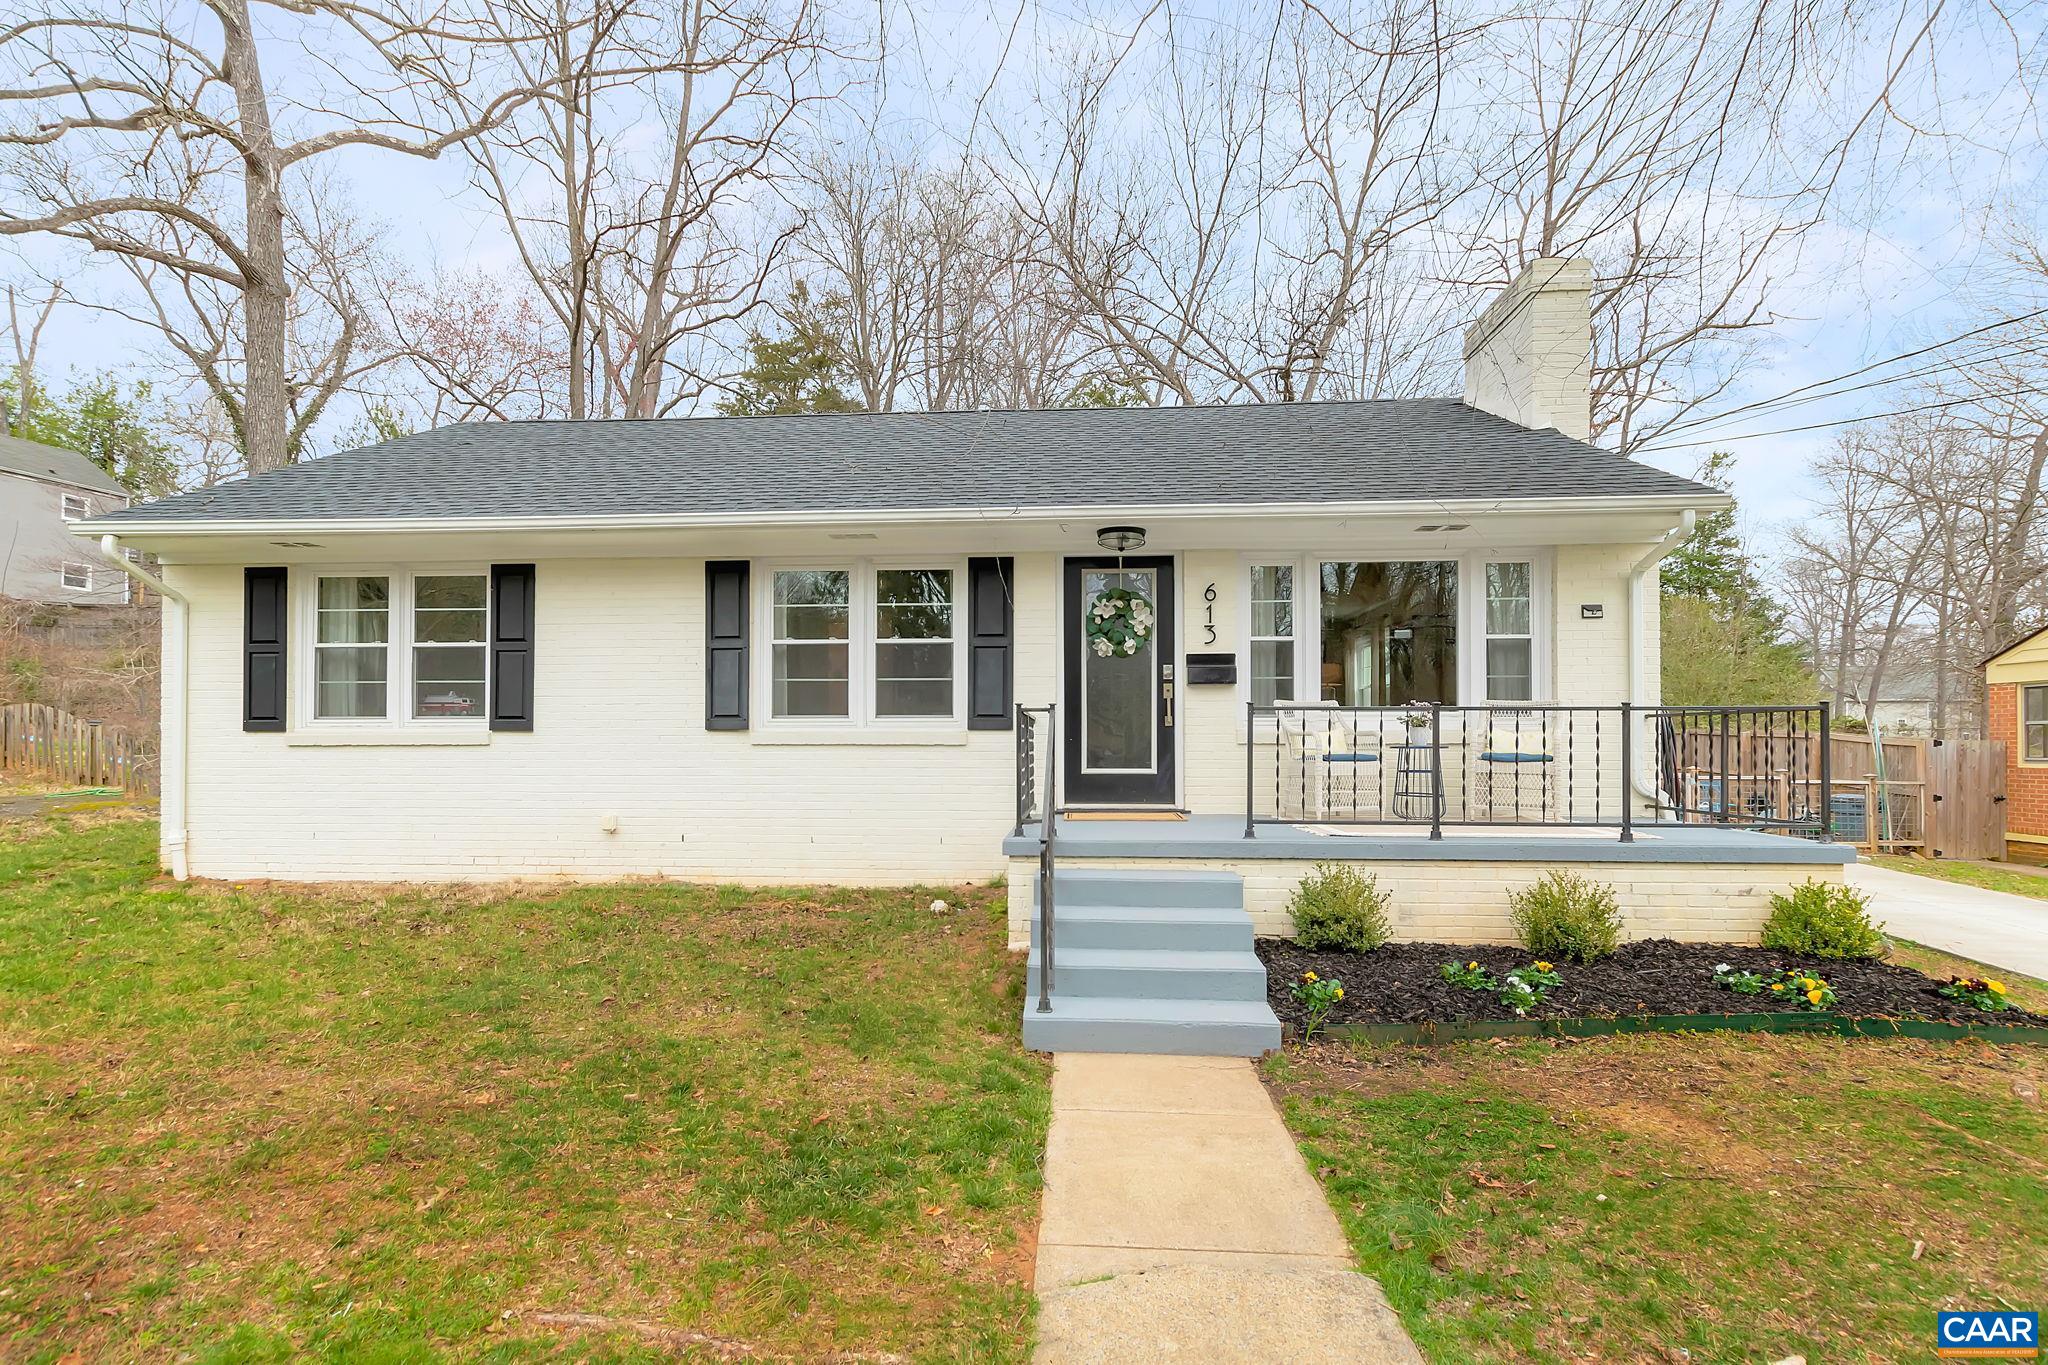 OPEN SUN (3/12) 2-4PM.  Fantastic opportunity to live in a RENOVATED 4br/2ba brick home on a quarter-acre lot in an established downtown neighborhood. Truly EXCEPTIONAL CENTRAL LOCATION around the corner from Northeast Park, Botanical Garden, Rivanna Trail + only 20 mins walk to the vibrant Downtown Mall!  Or stay at home + enjoy your coffee from the elevated front porch or SCREENED PORCH overlooking spacious fenced yard.  Curb appeal abounds: painted brick w/ new windows, landscaping + ample off-street PARKING. Inside, a bright OPEN FLOOR PLAN feat. modern well-designed open kitchen w/ island + wood-burning fireplace. 3 main-level bedrooms plus gracious master suite downstairs w/ walk-in closet + gorgeous reno'd bath. Many new systems throughout (inc. water htr, A/C, loose-fill cellulose insulation) from comprehensive renovation in 2017. Must see!